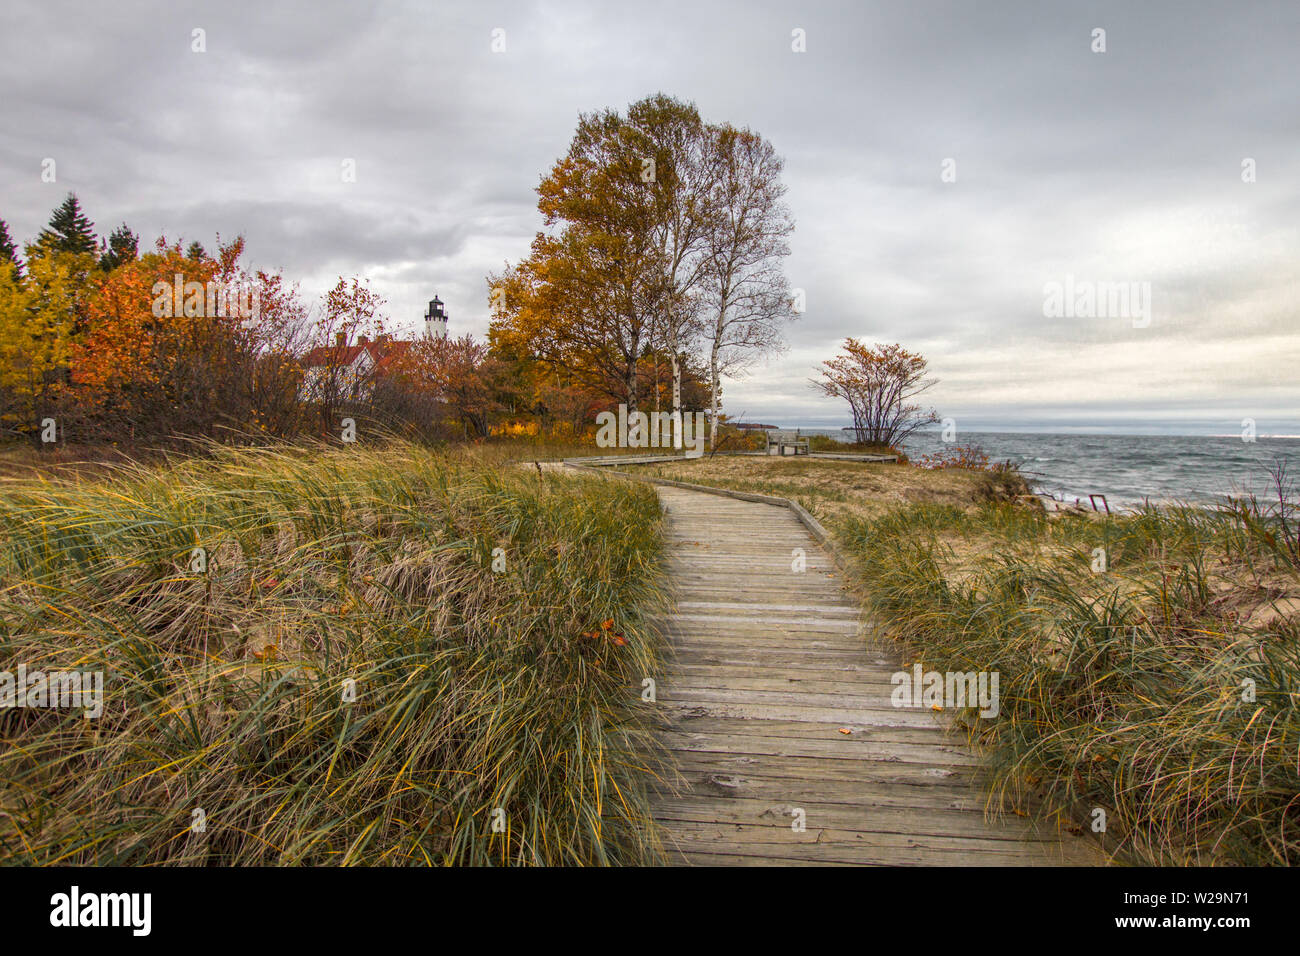 Boardwalk On Beach. Boardwalk trail through dune grass with the Point Iroquois lighthouse along Lake Superior in Hiawatha National Forest of Michigan. Stock Photo